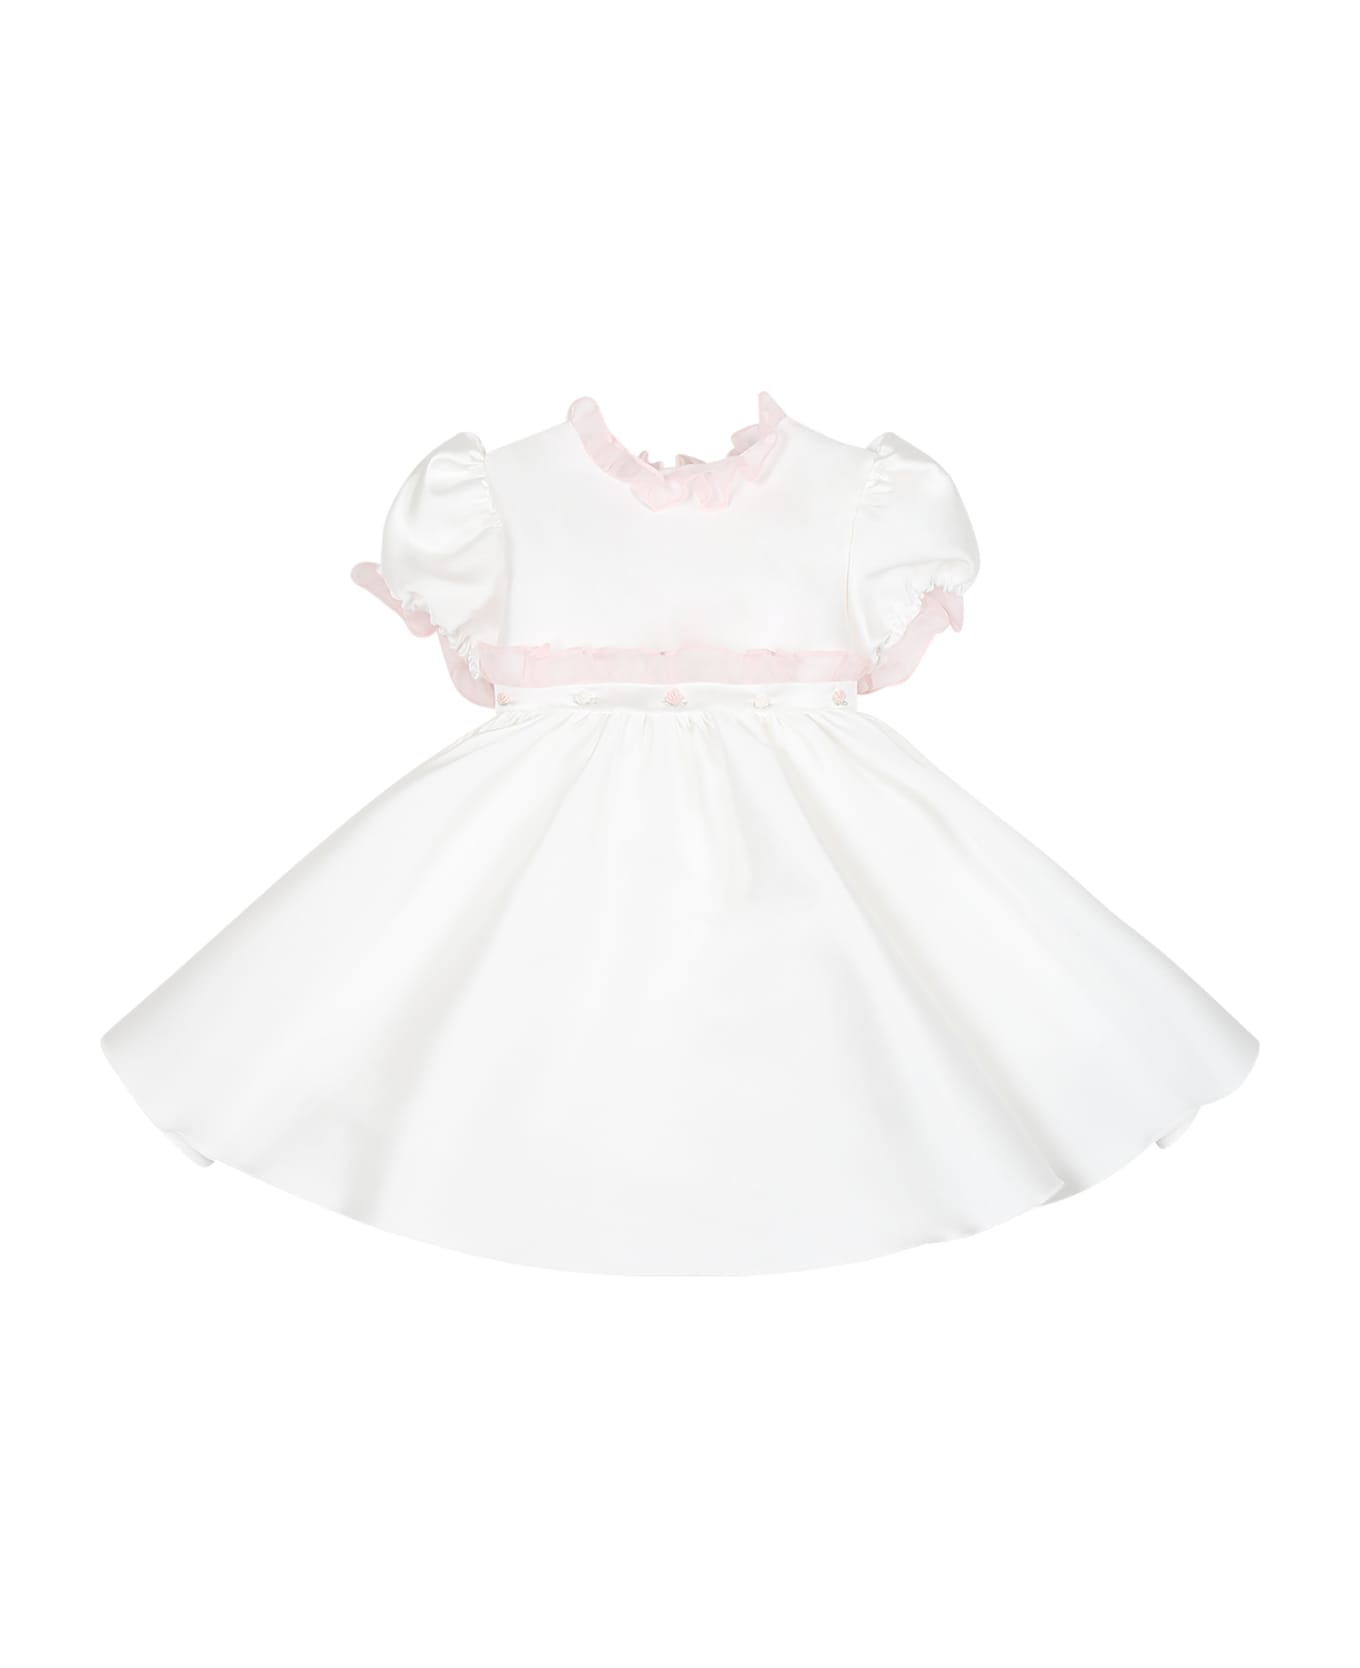 La stupenderia White Dress For Baby Girl With Flowers - White